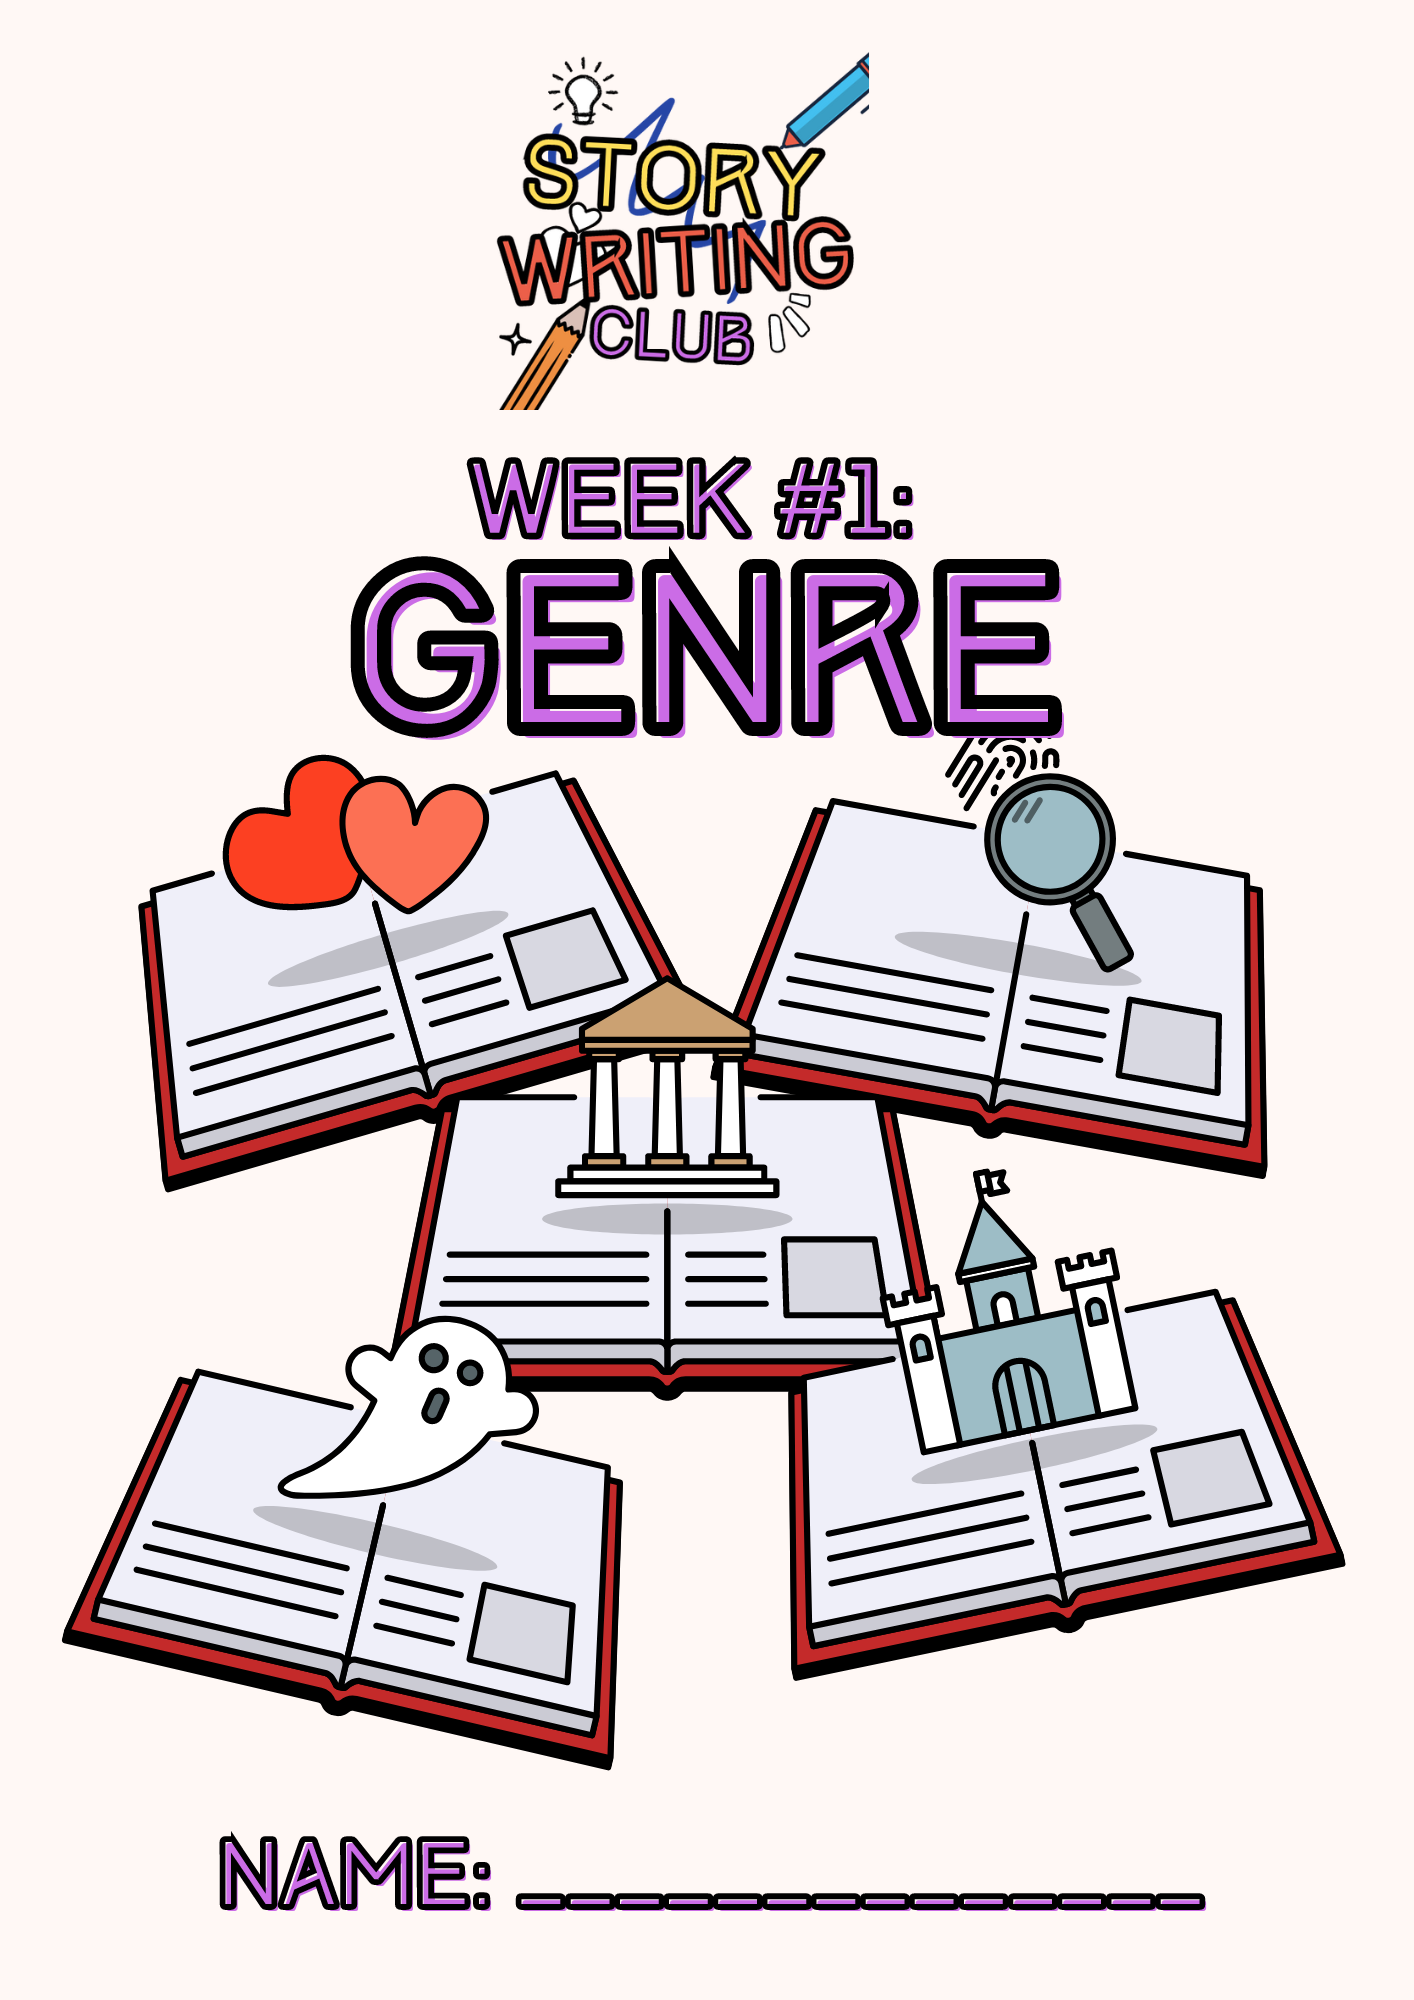 Story Writing Club flyer featuring genre exploration.